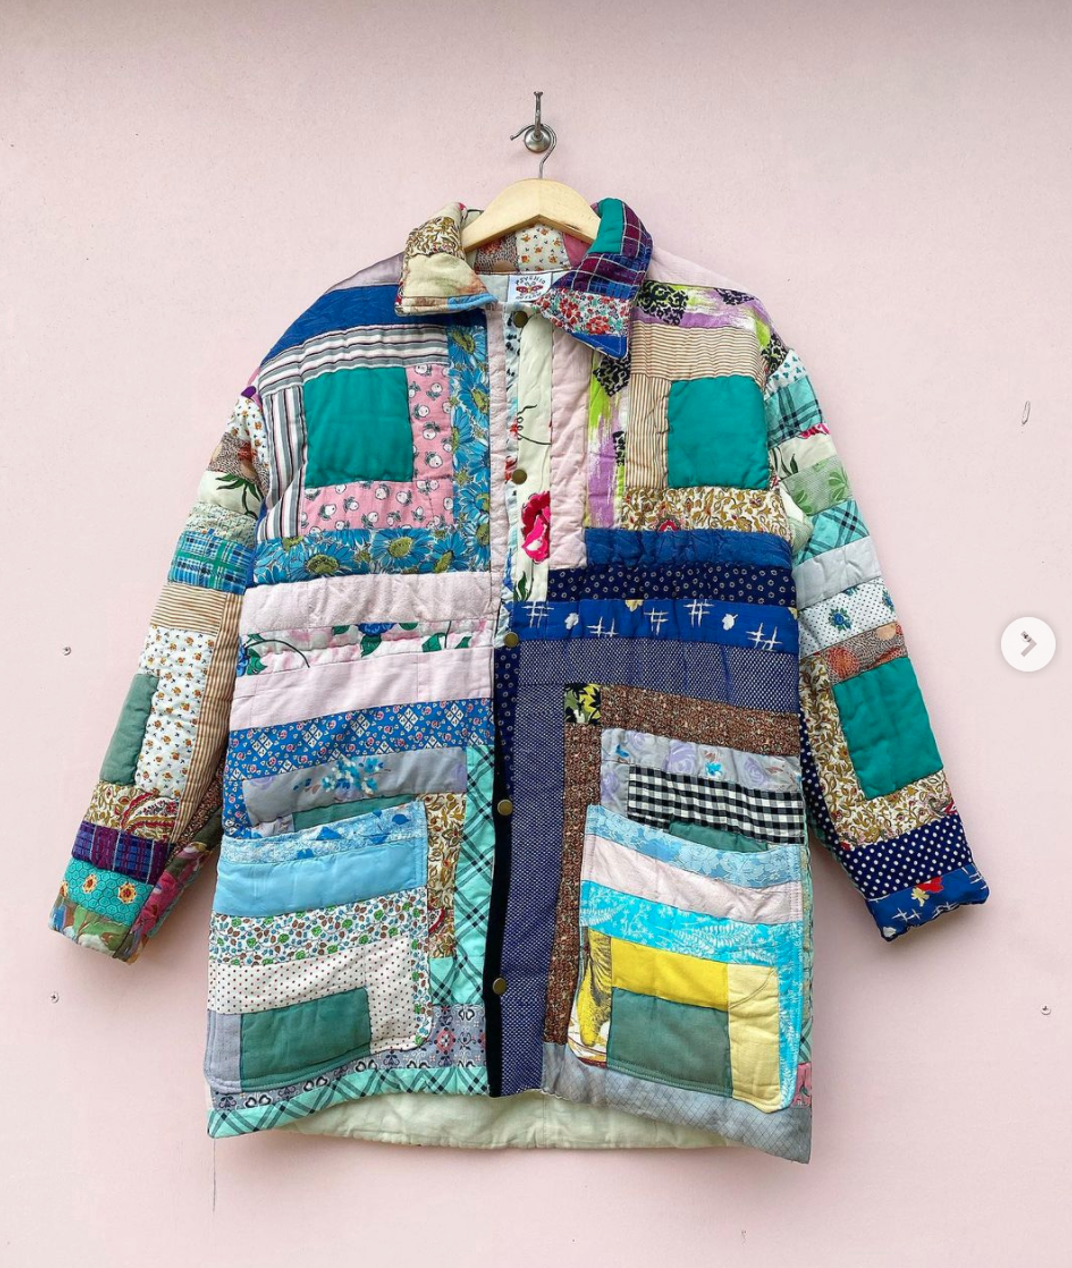 6:‘Log Cabin Quilt Coat’, 2020, American, @psychic.outlaw on Instagram 